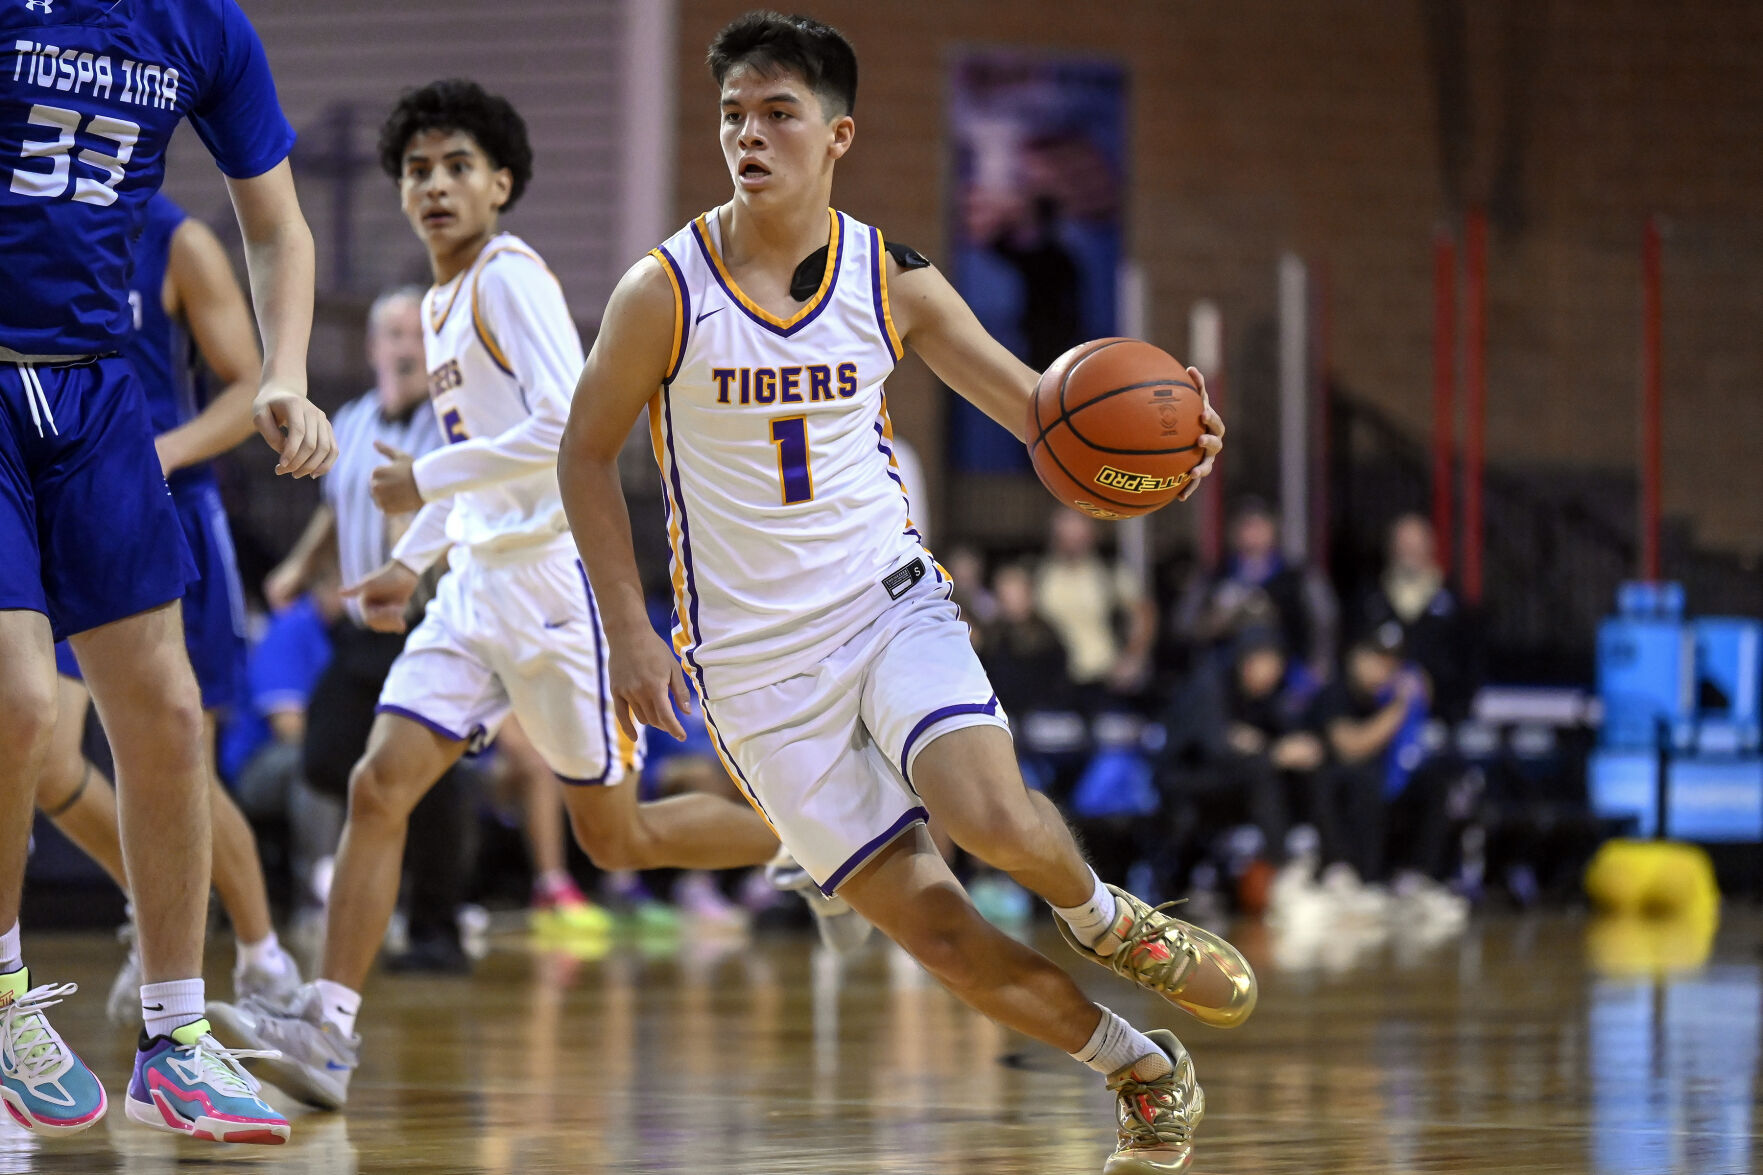 White River boys basketball team outlasts Tiospa Zina in 59-46 victory, Nicolas Marshall leads Tigers with 24 points